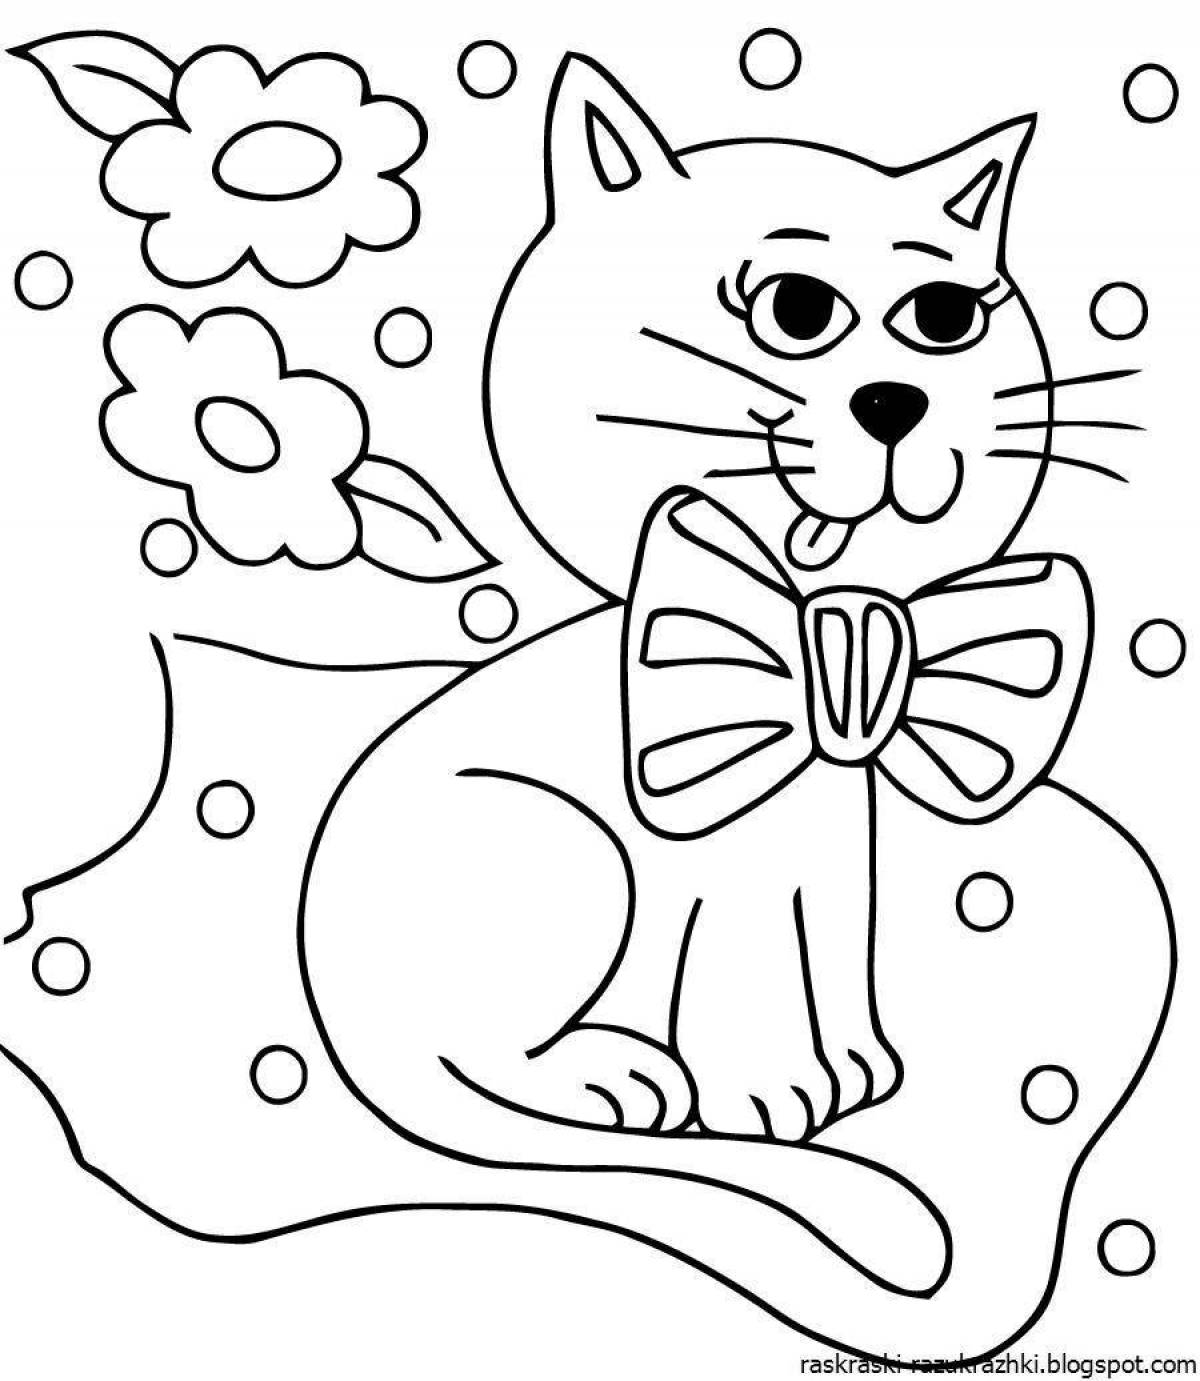 Radiant kitty coloring book for kids 5-6 years old